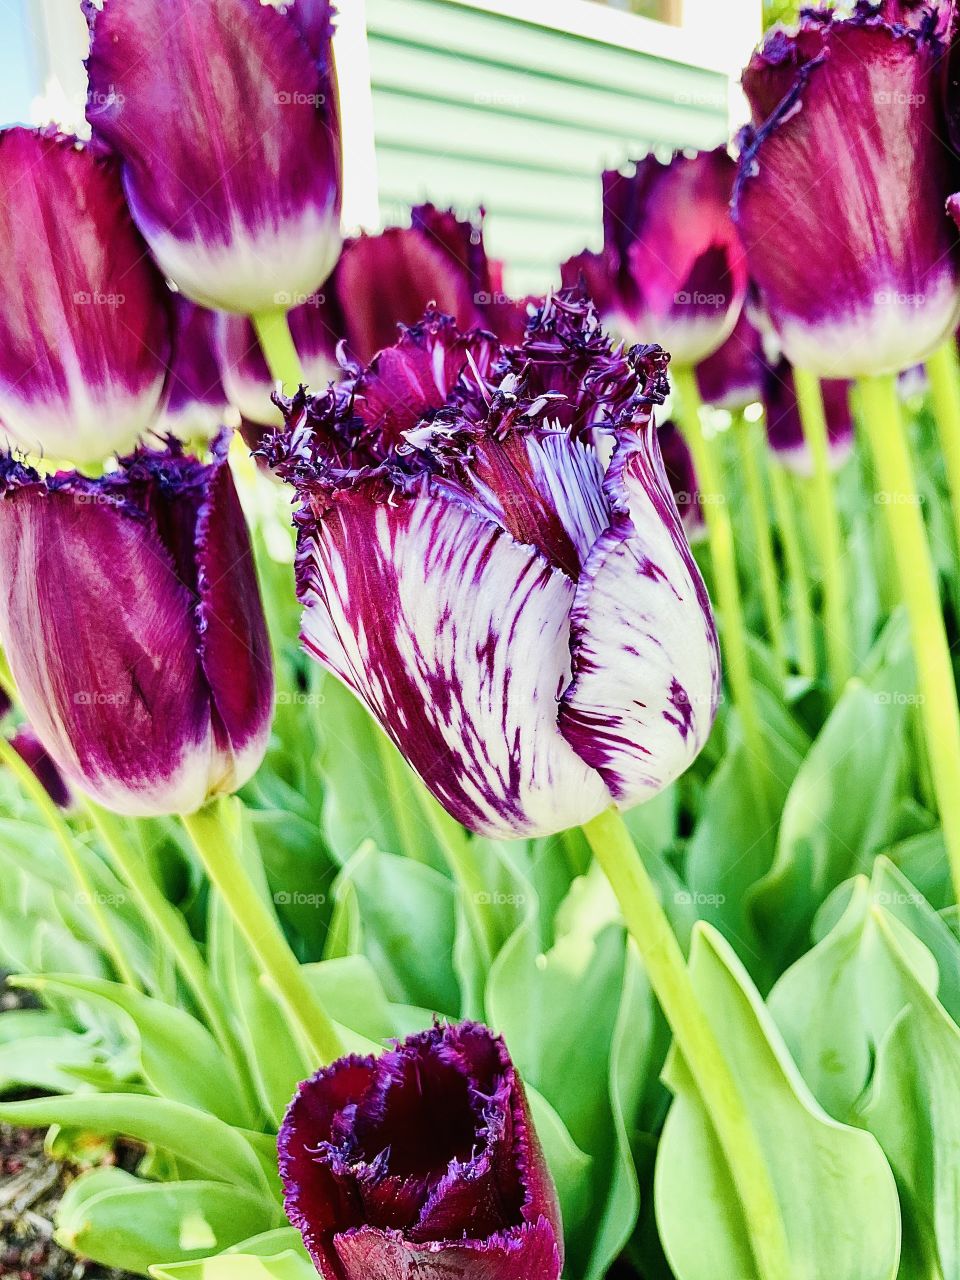 Gorgeous purple and white tulips make for beautiful spring colors!! 